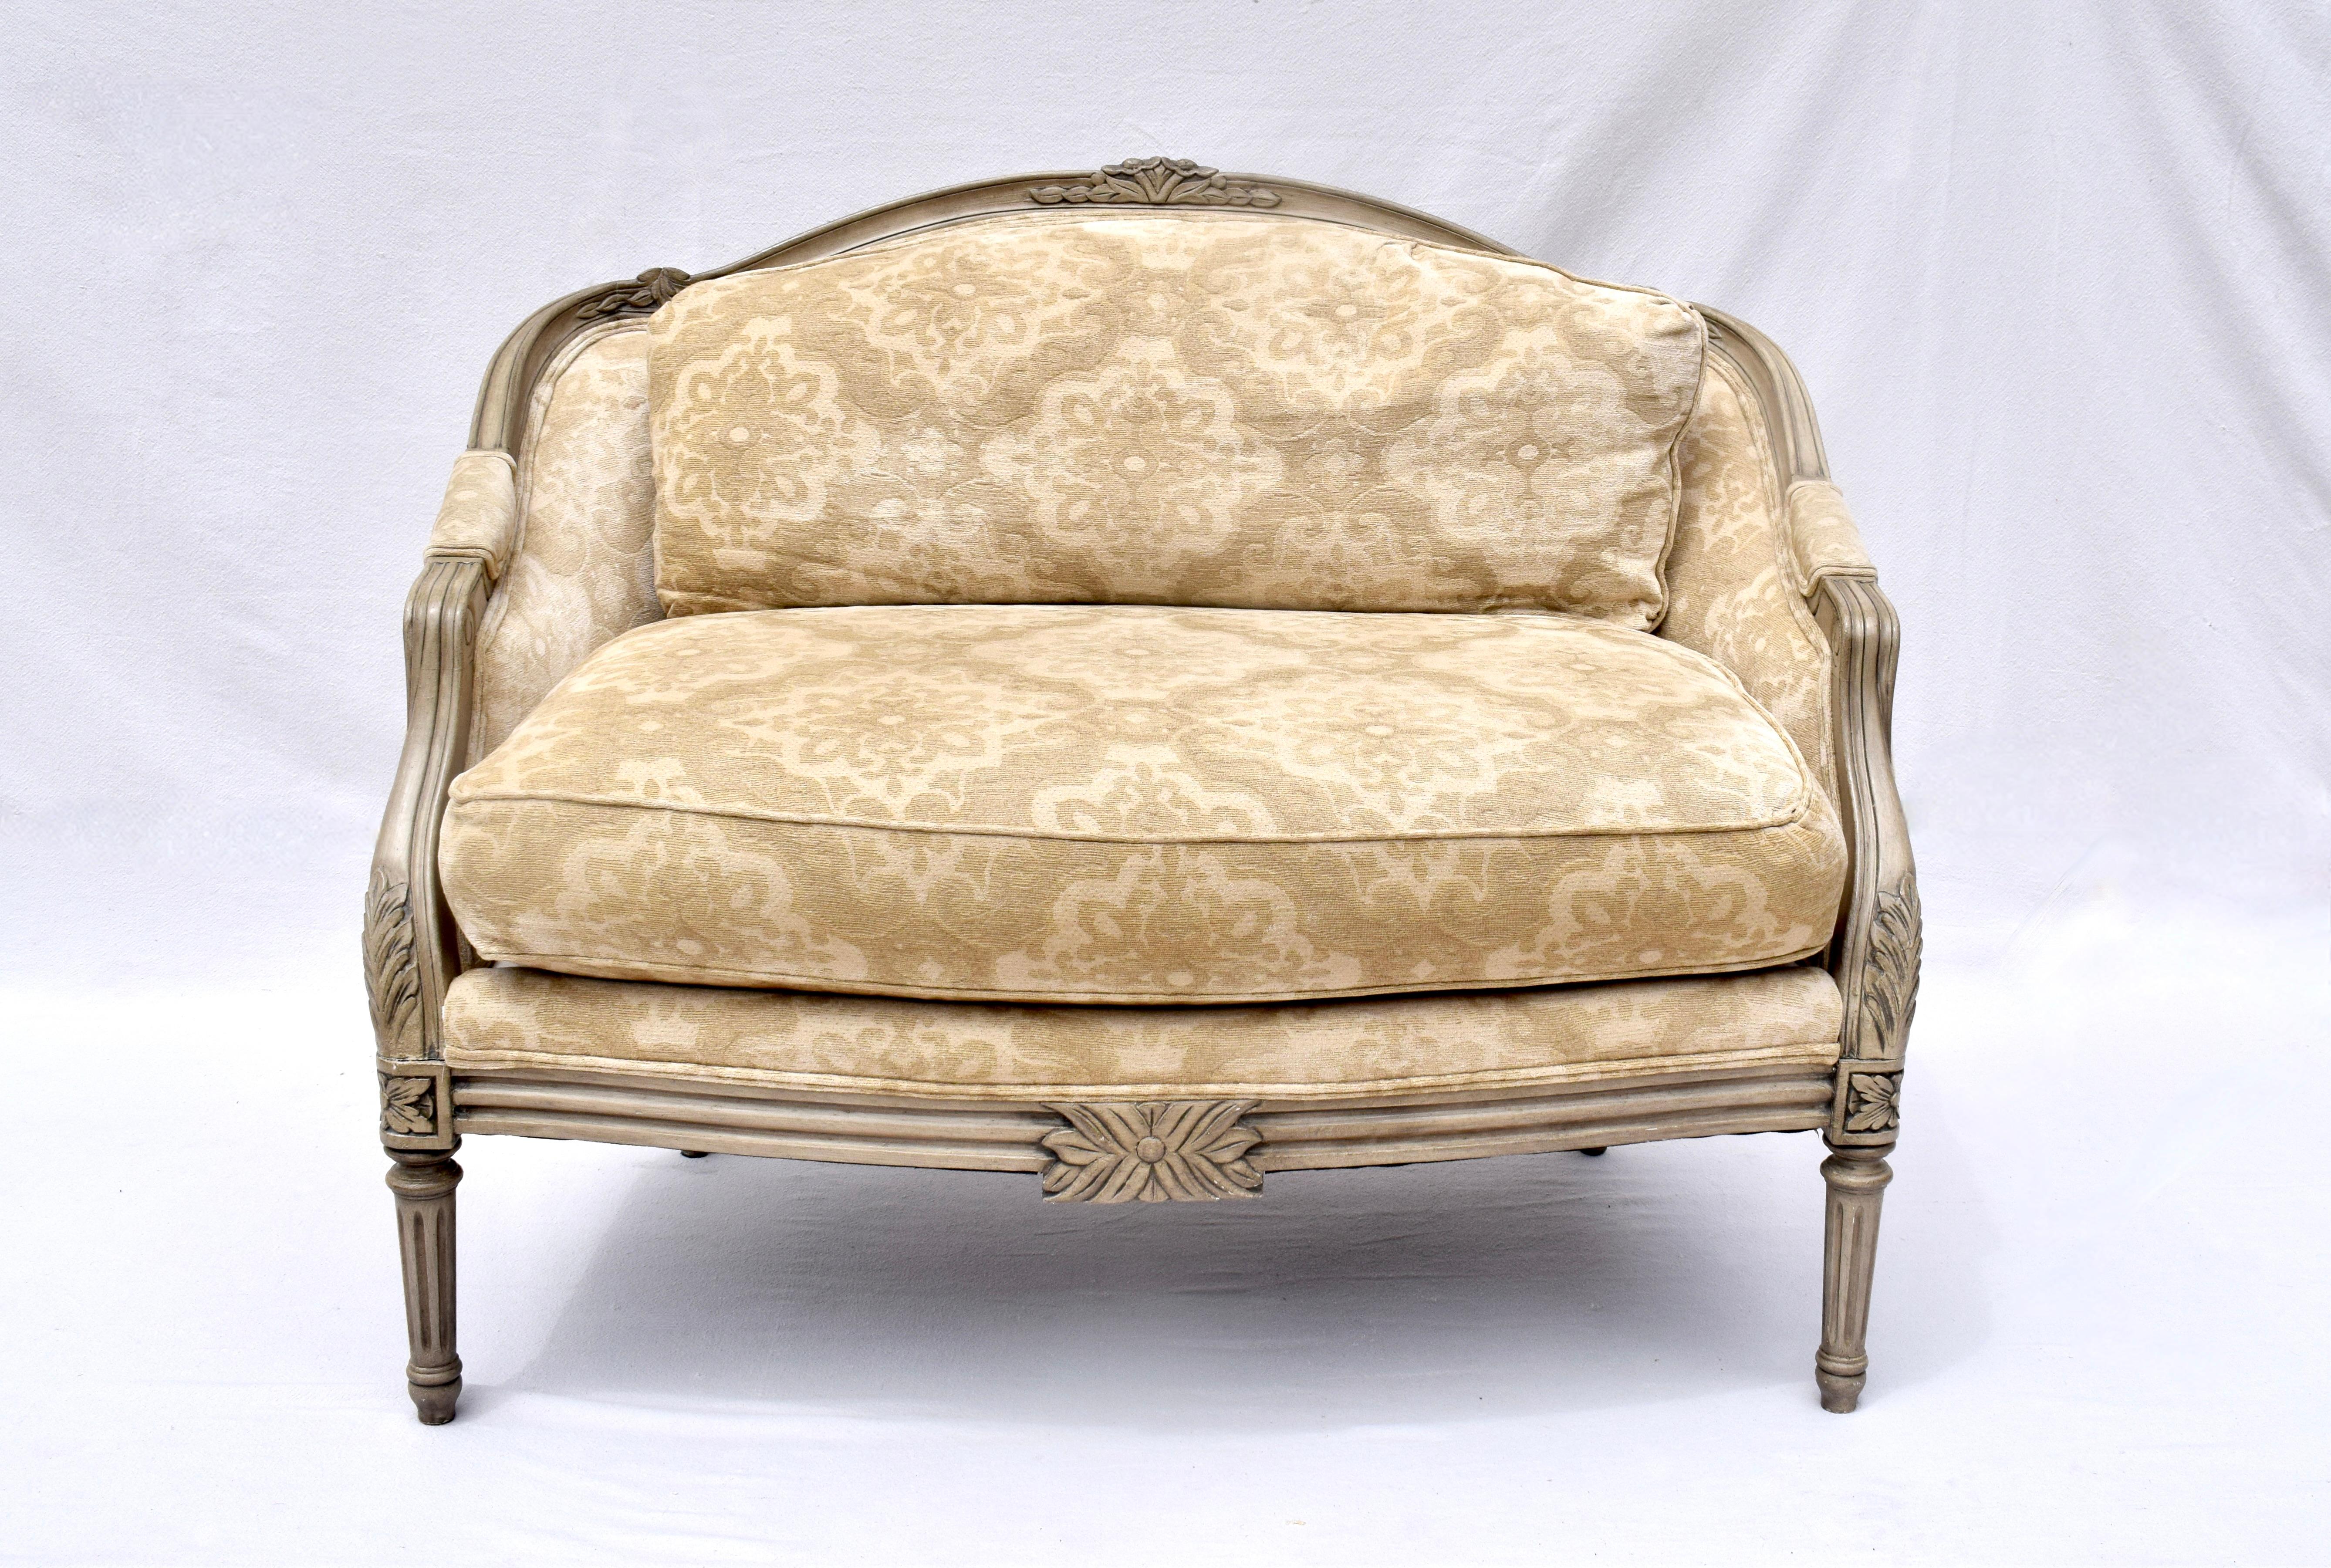 French Louis XvI Style Marquise Bergere Armchair & Ottoman with distinct design elements of the period including hand-crafted Gustavian inspired finish, carved rosette corners atop tapered fluted legs.  The extra wide seat that defines the Marquise